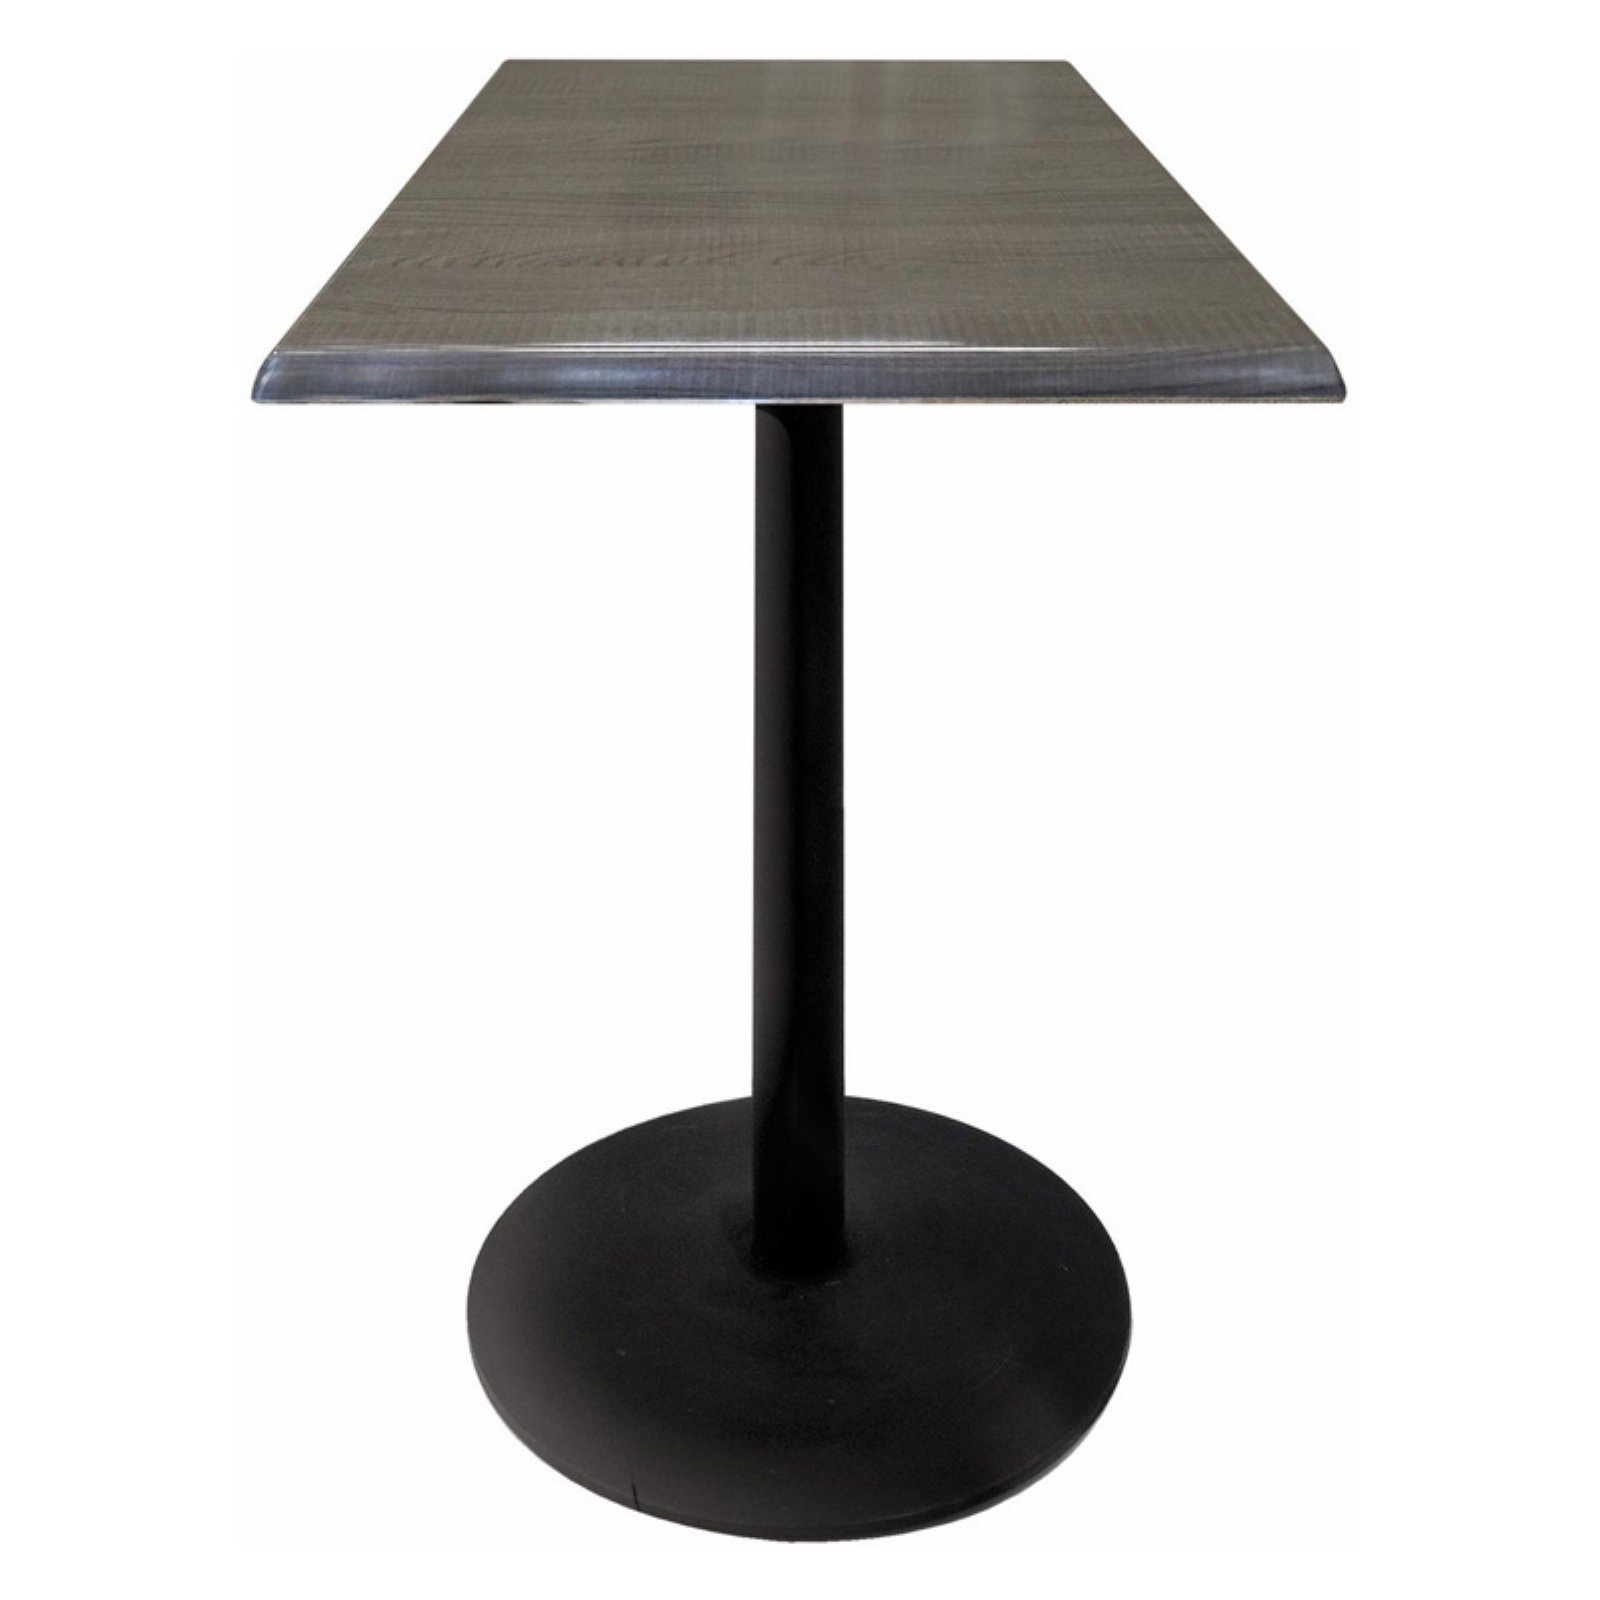 Indoor/Outdoor 30" Tall OD214 Black Table Base with 22" Diameter Foot and 36" x 36" Square Indoor/Outdoor Rustic Top by the Holland Bar Stool Co. - image 5 of 5